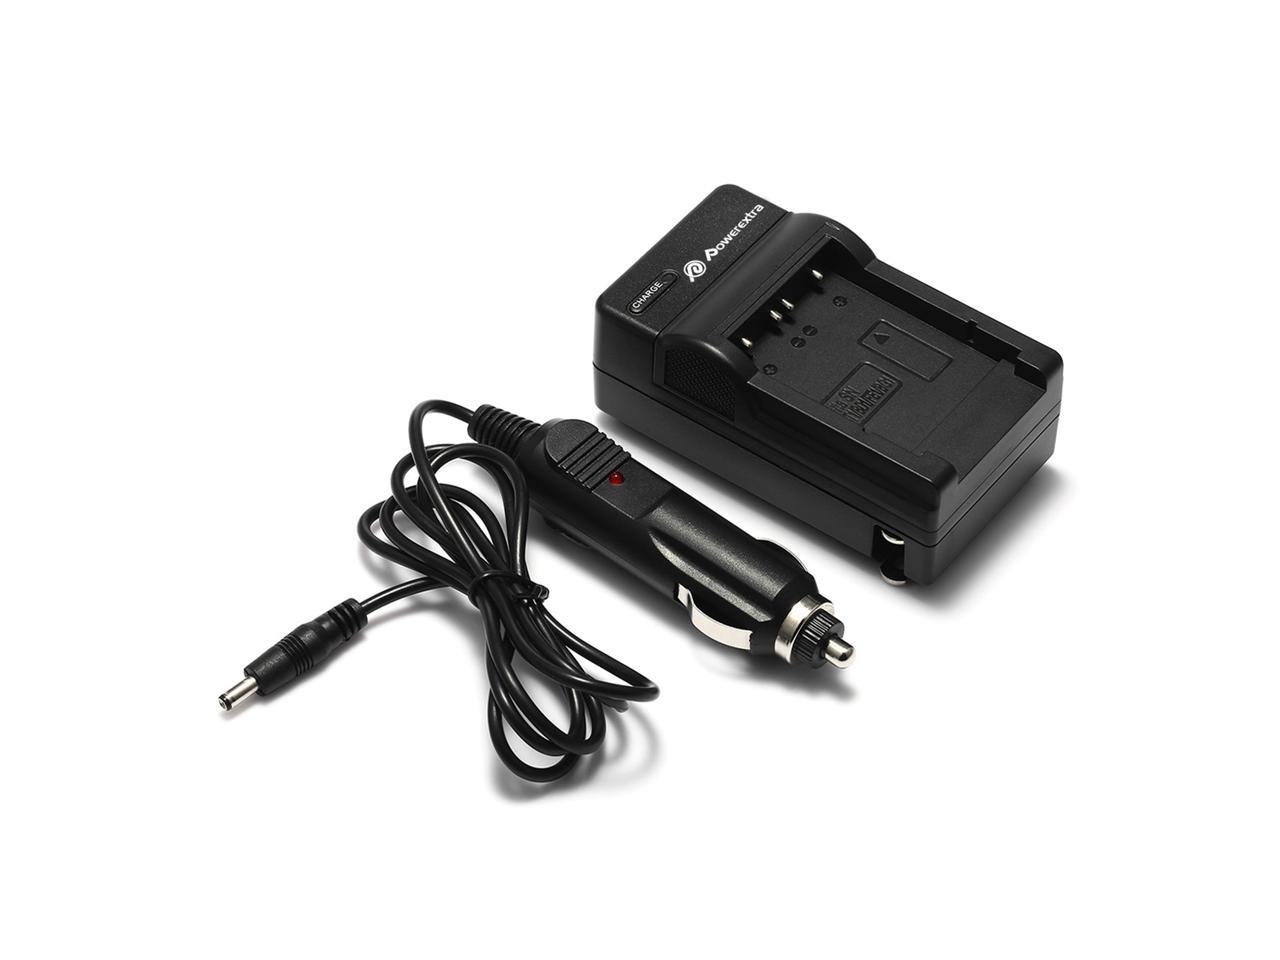 BATTERY Micro-USB Charger for Sony DSC-H55 